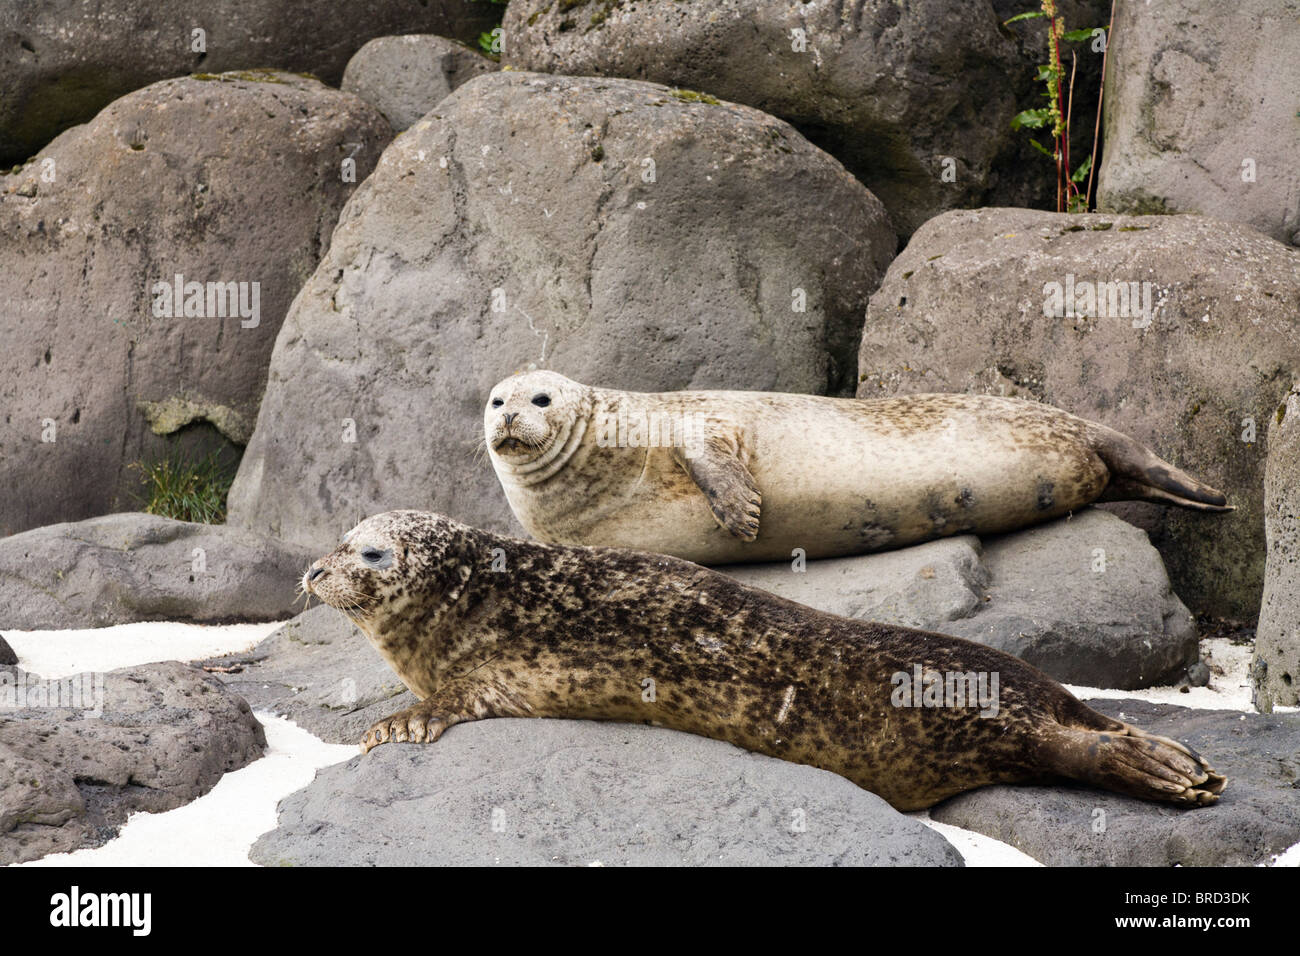 The Common Seal (Phoca vitulina), also known as the Harbor (or Harbour) Seal. Stock Photo